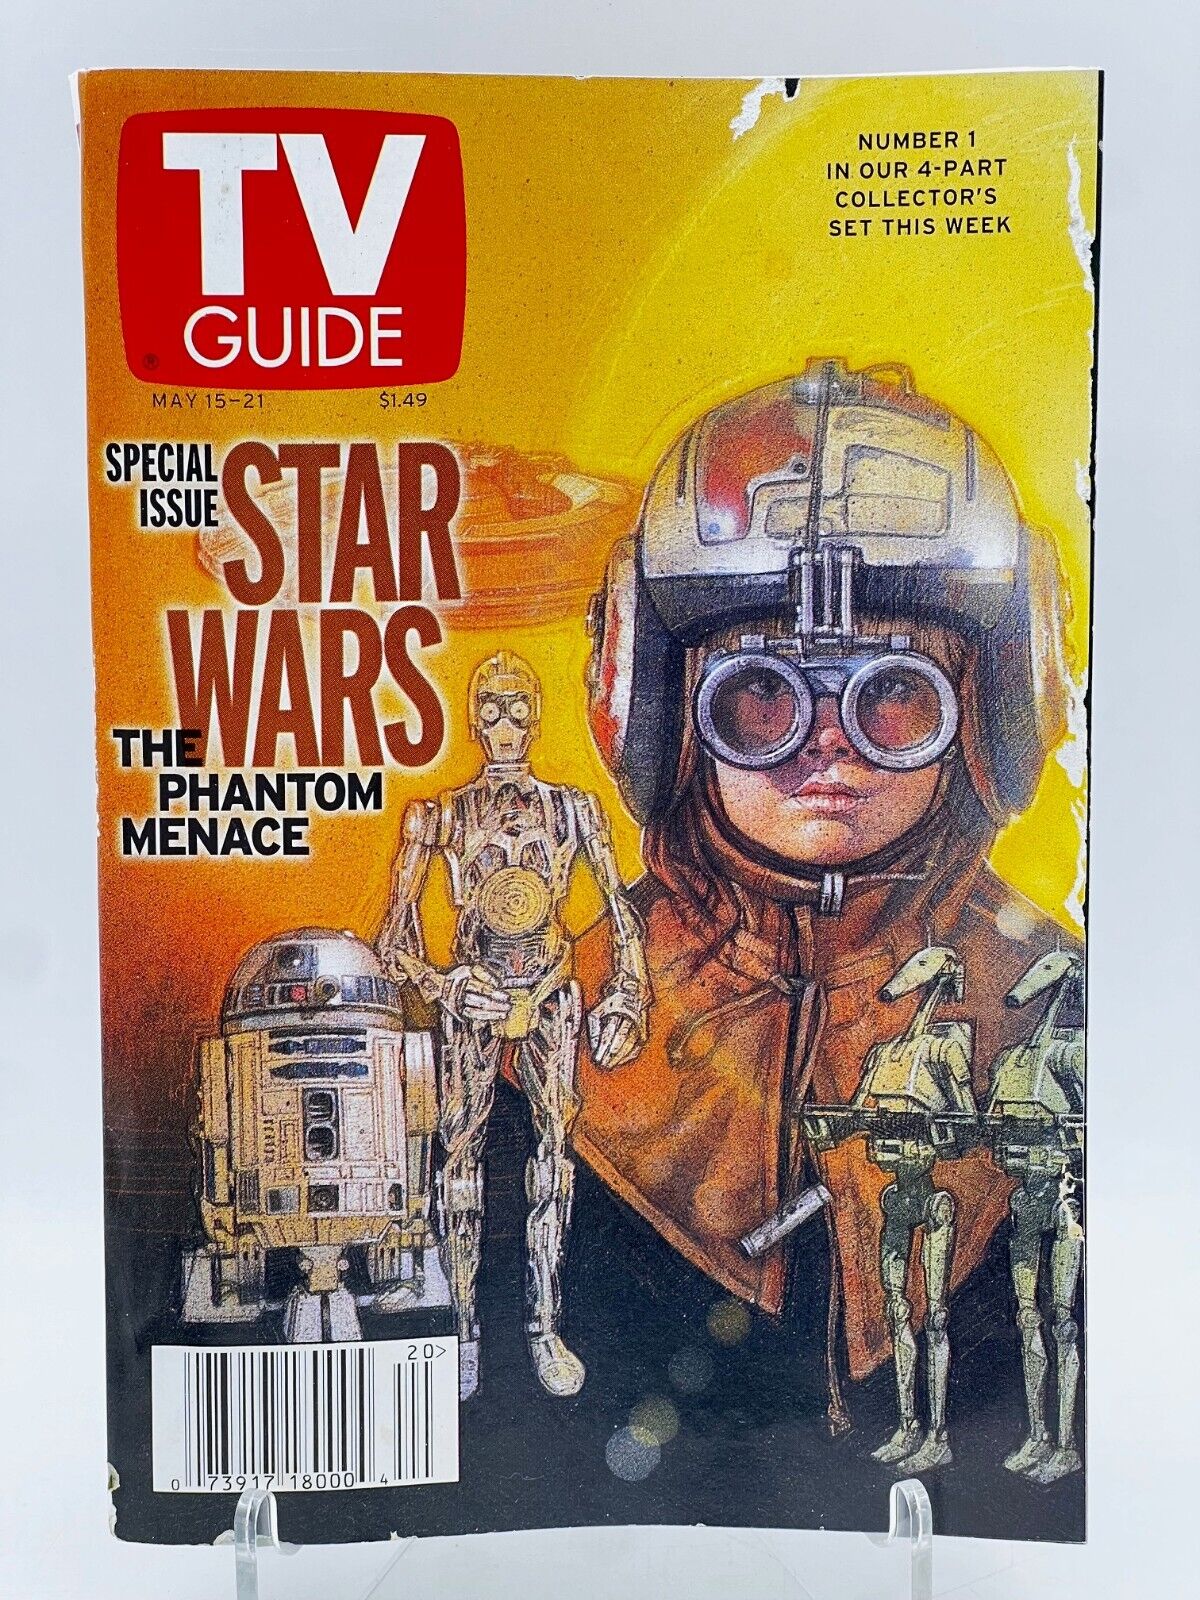 TV Guide Special Issue Star Wars May 15-21 1999,  #1 Cover In Collector's Series